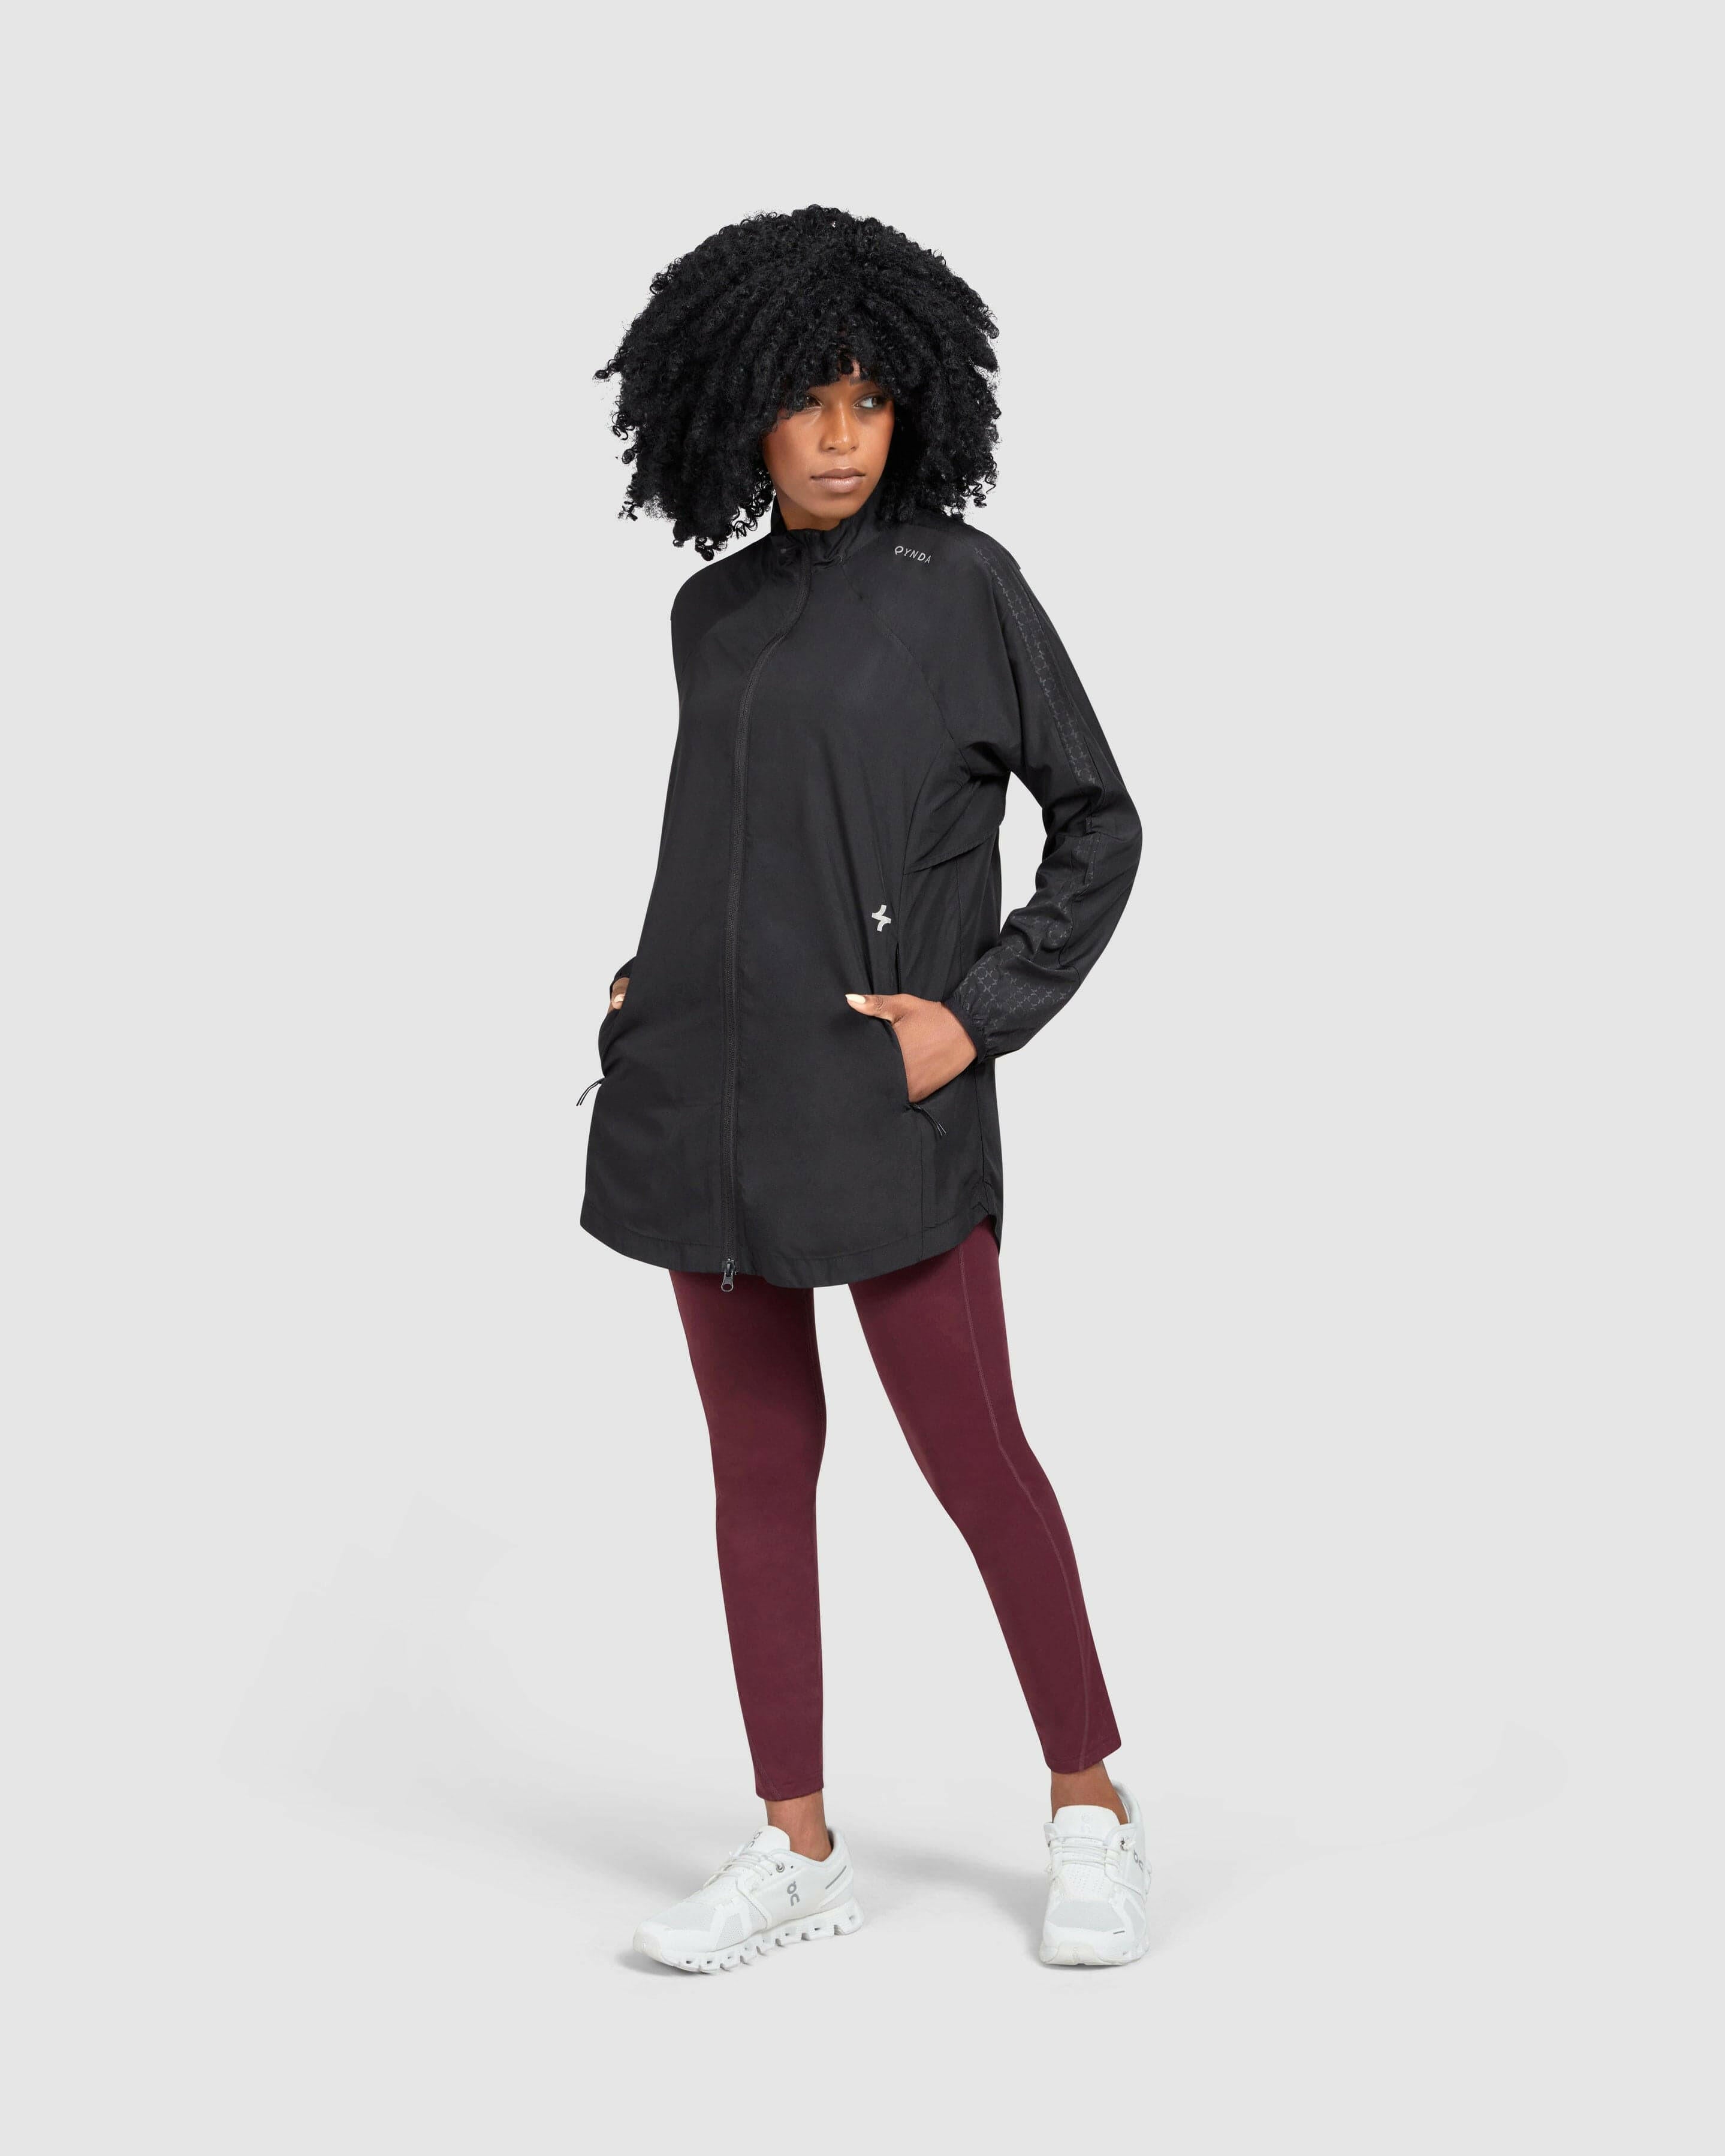 A confident model in FLY JACKET crafted from super light fabric and maroon leggings paired with white sneakers poses with her hand on her hip against a neutral background.